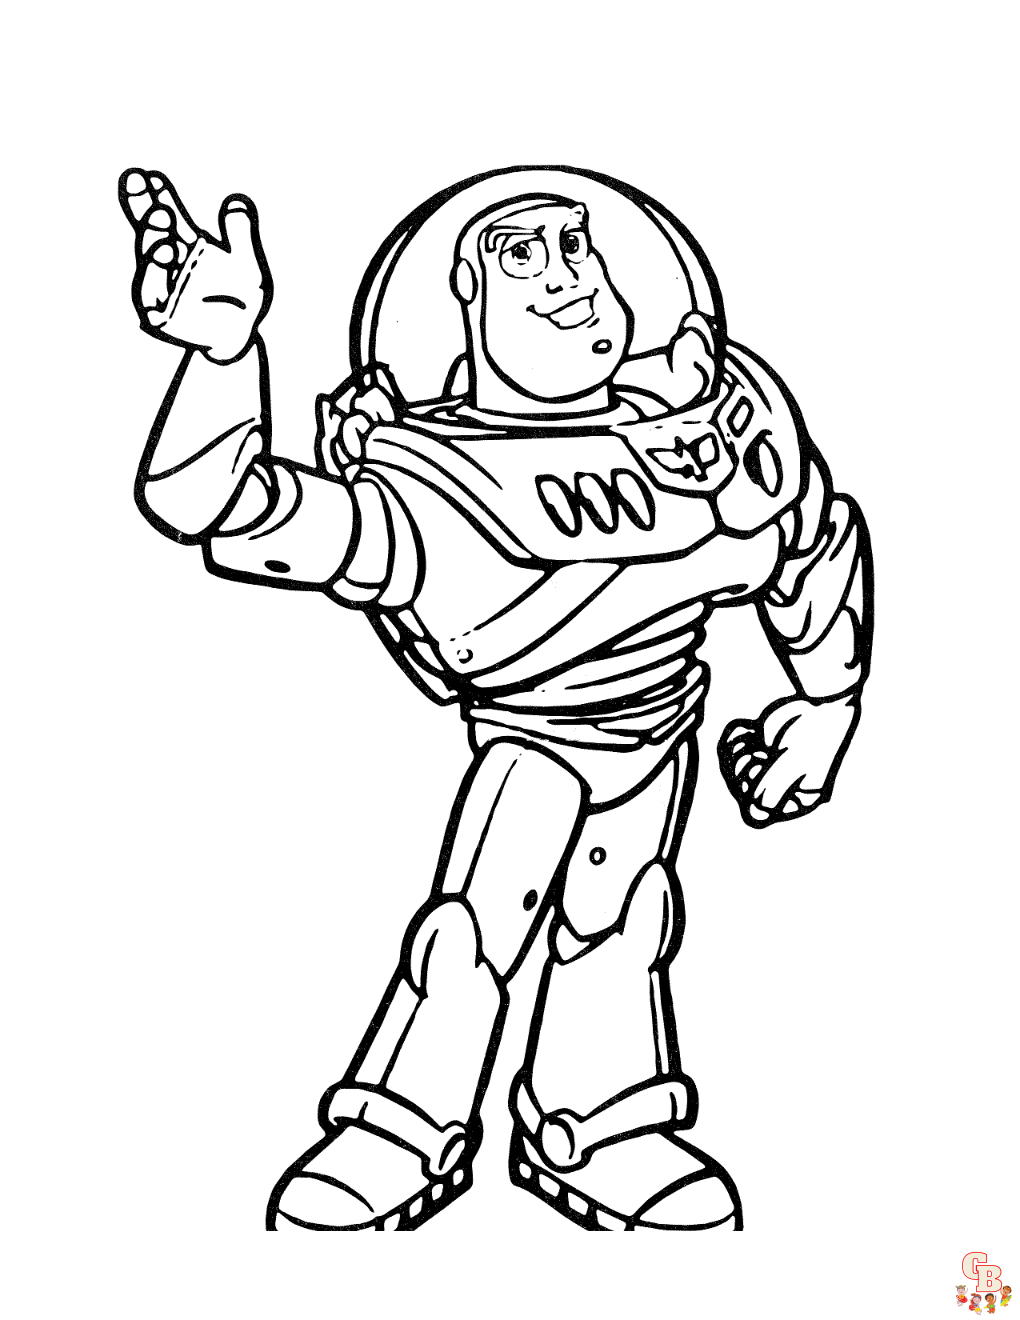 Discover fun and free buzz lightyear coloring pages to print